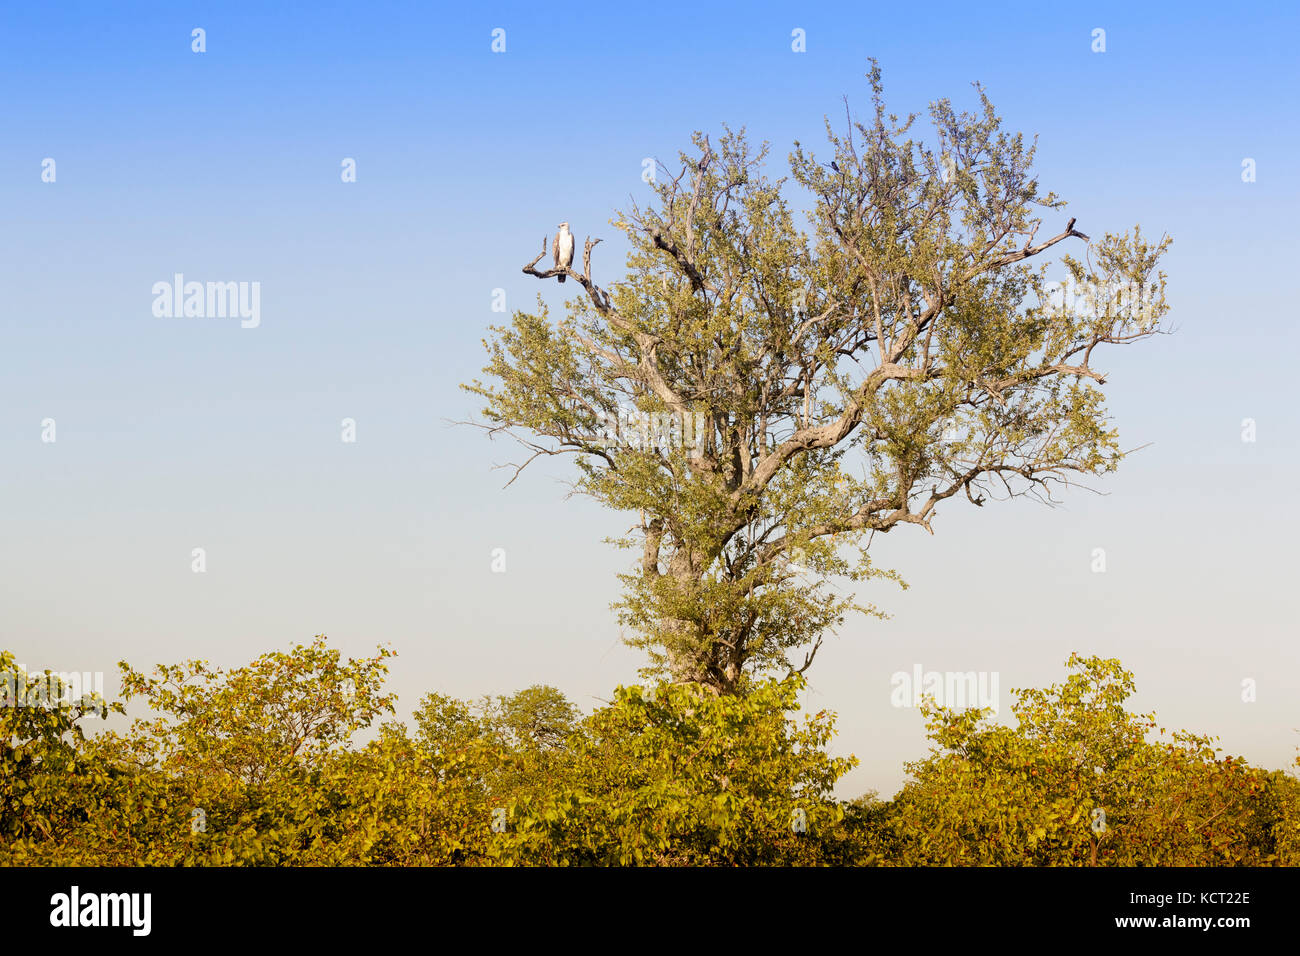 Martial eagle (Polemaetus bellicosus) perched in a tree, Kruger National Park, South Africa. Stock Photo